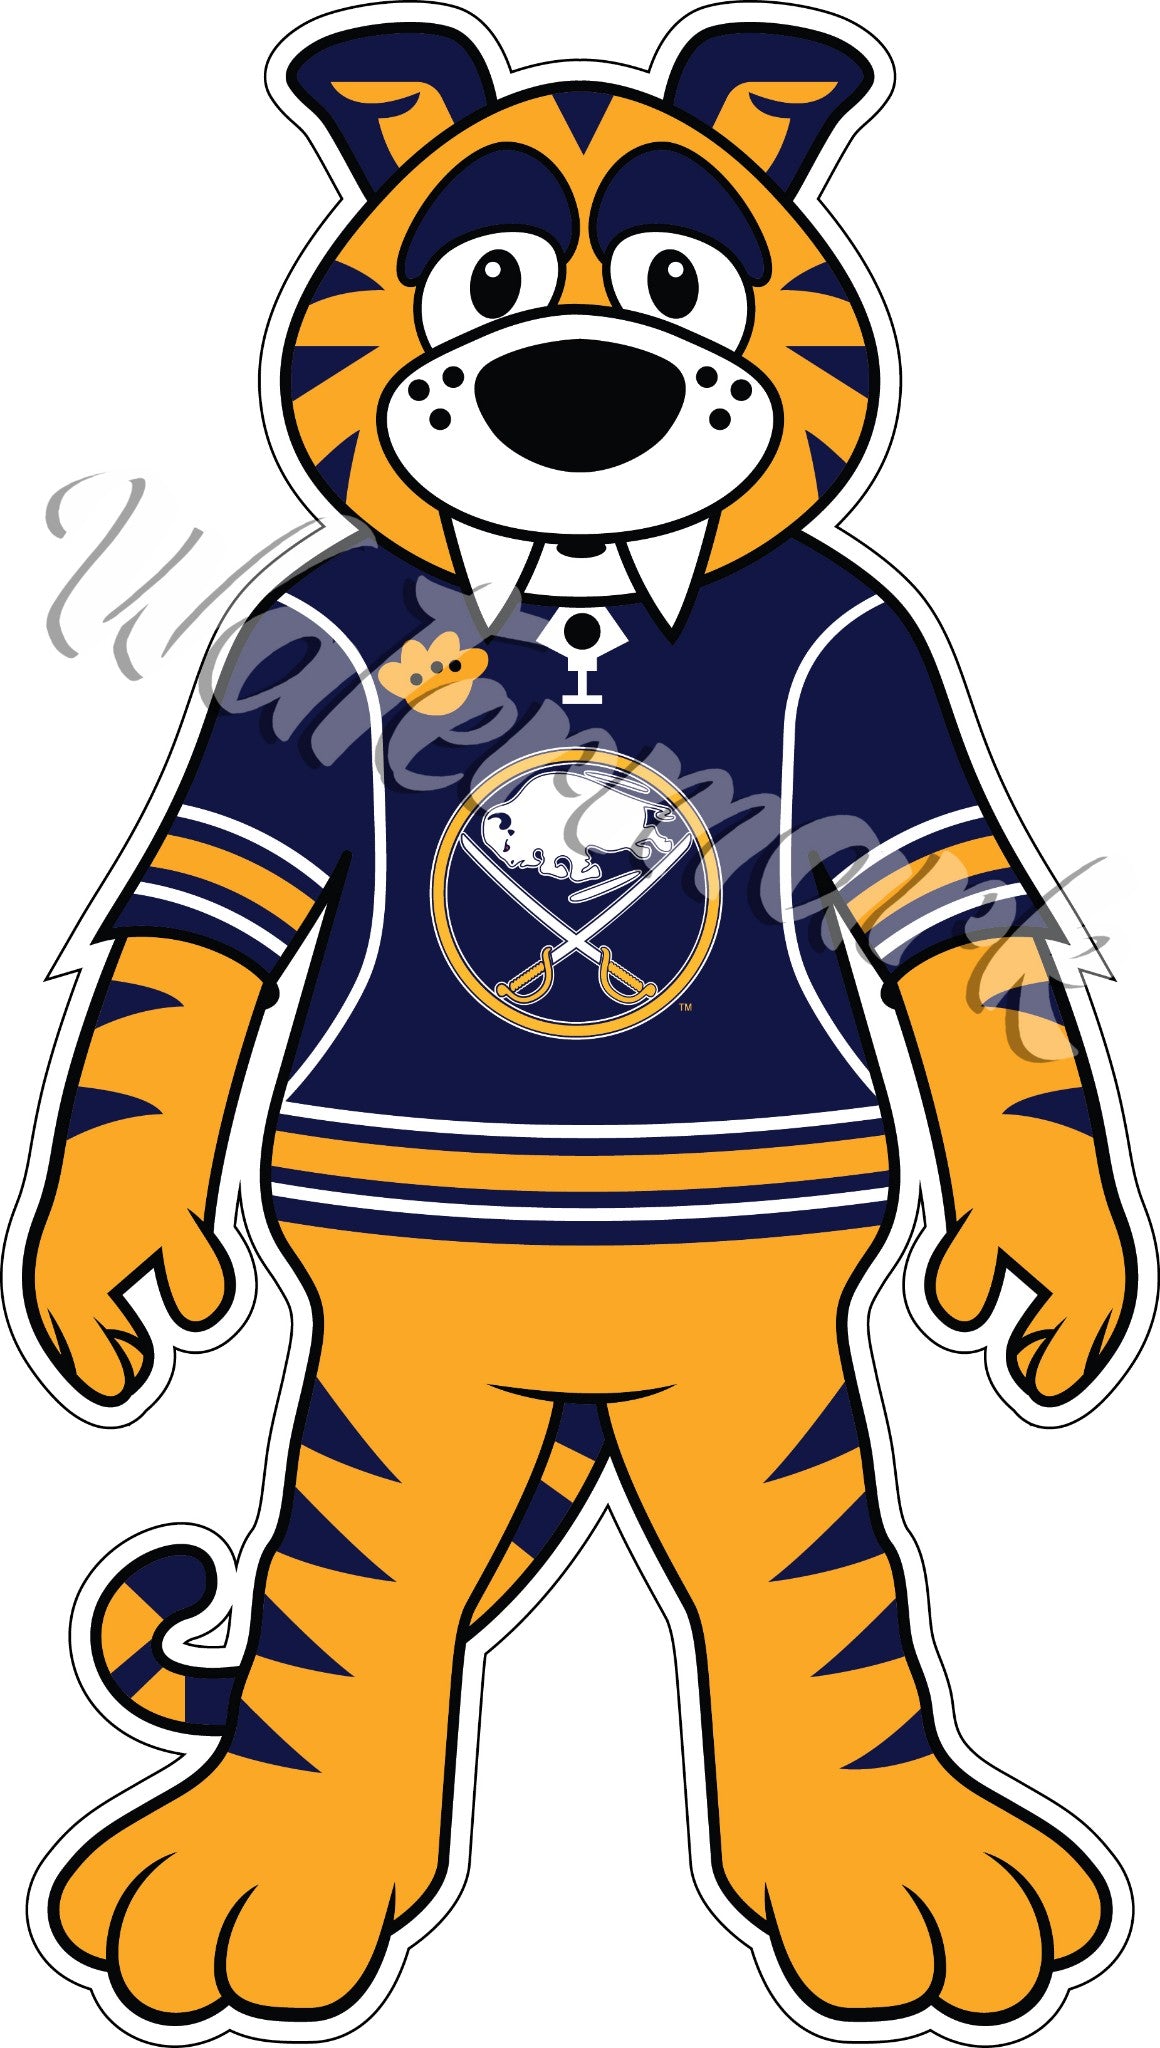 The Mascot Before Sabretooth